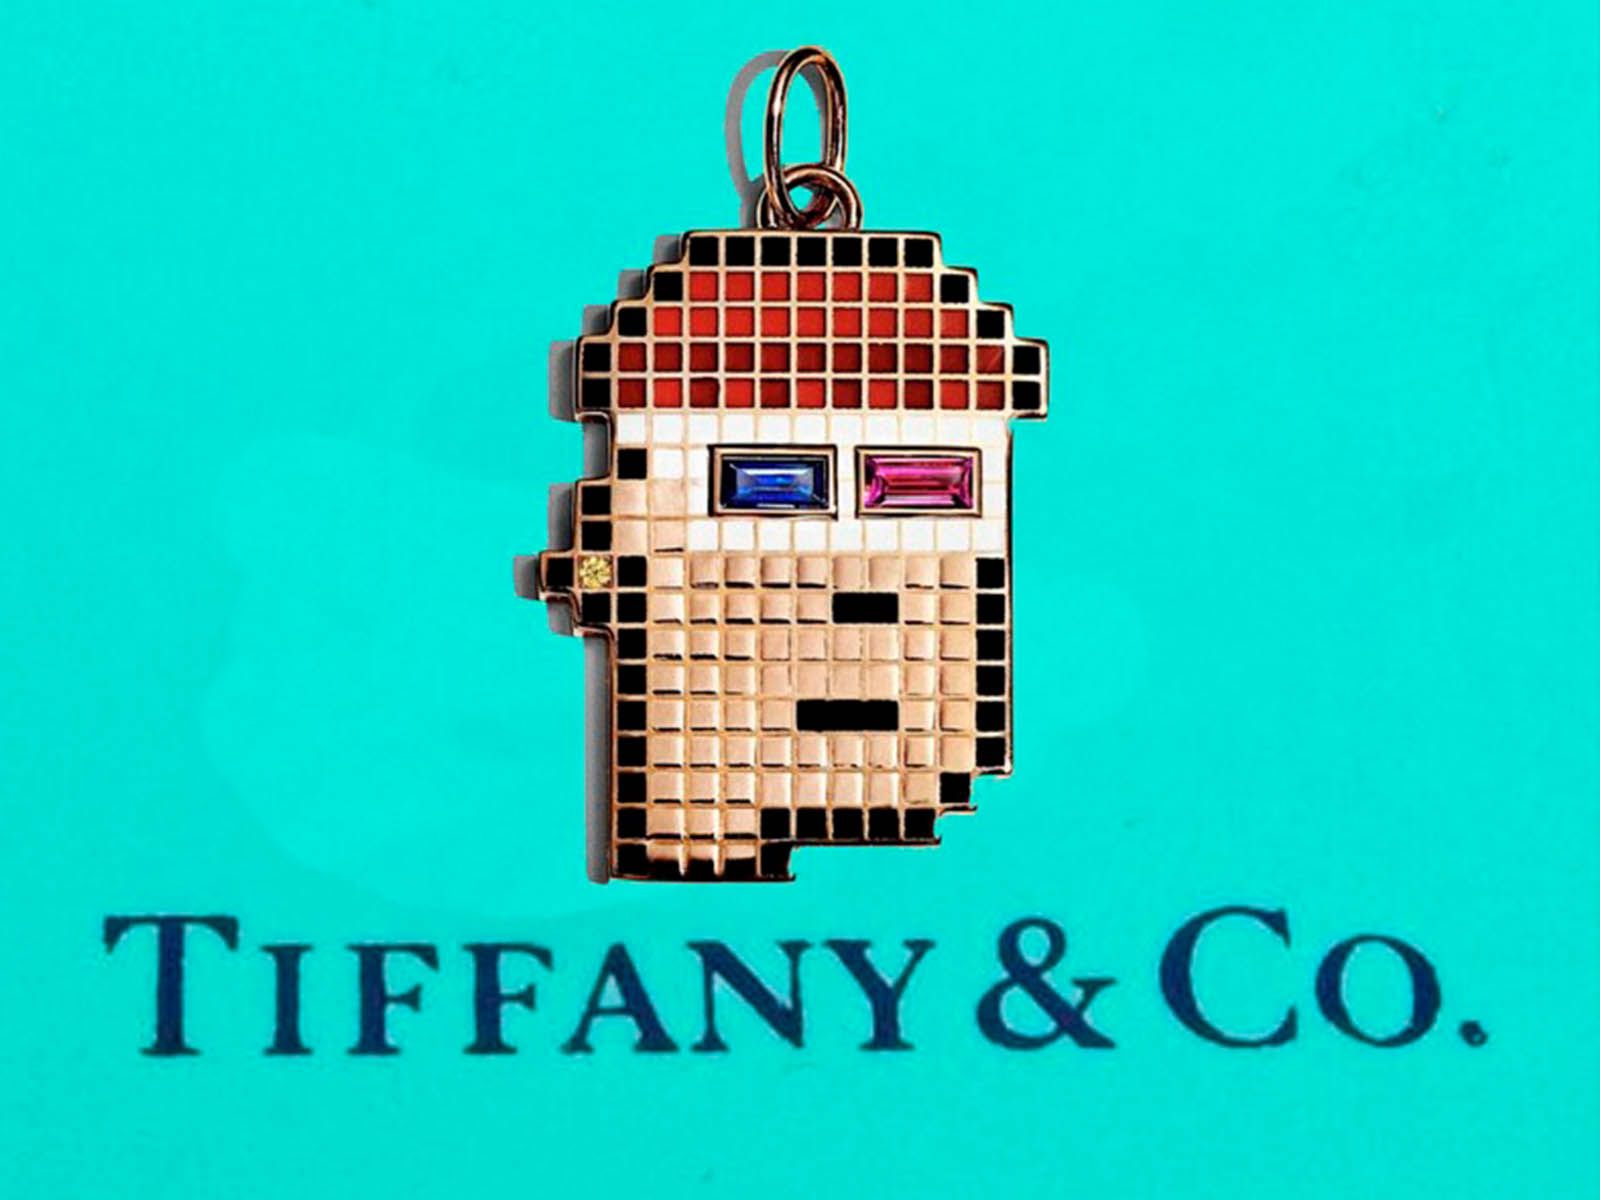 Tiffany & Co. enters into the world of NFTs